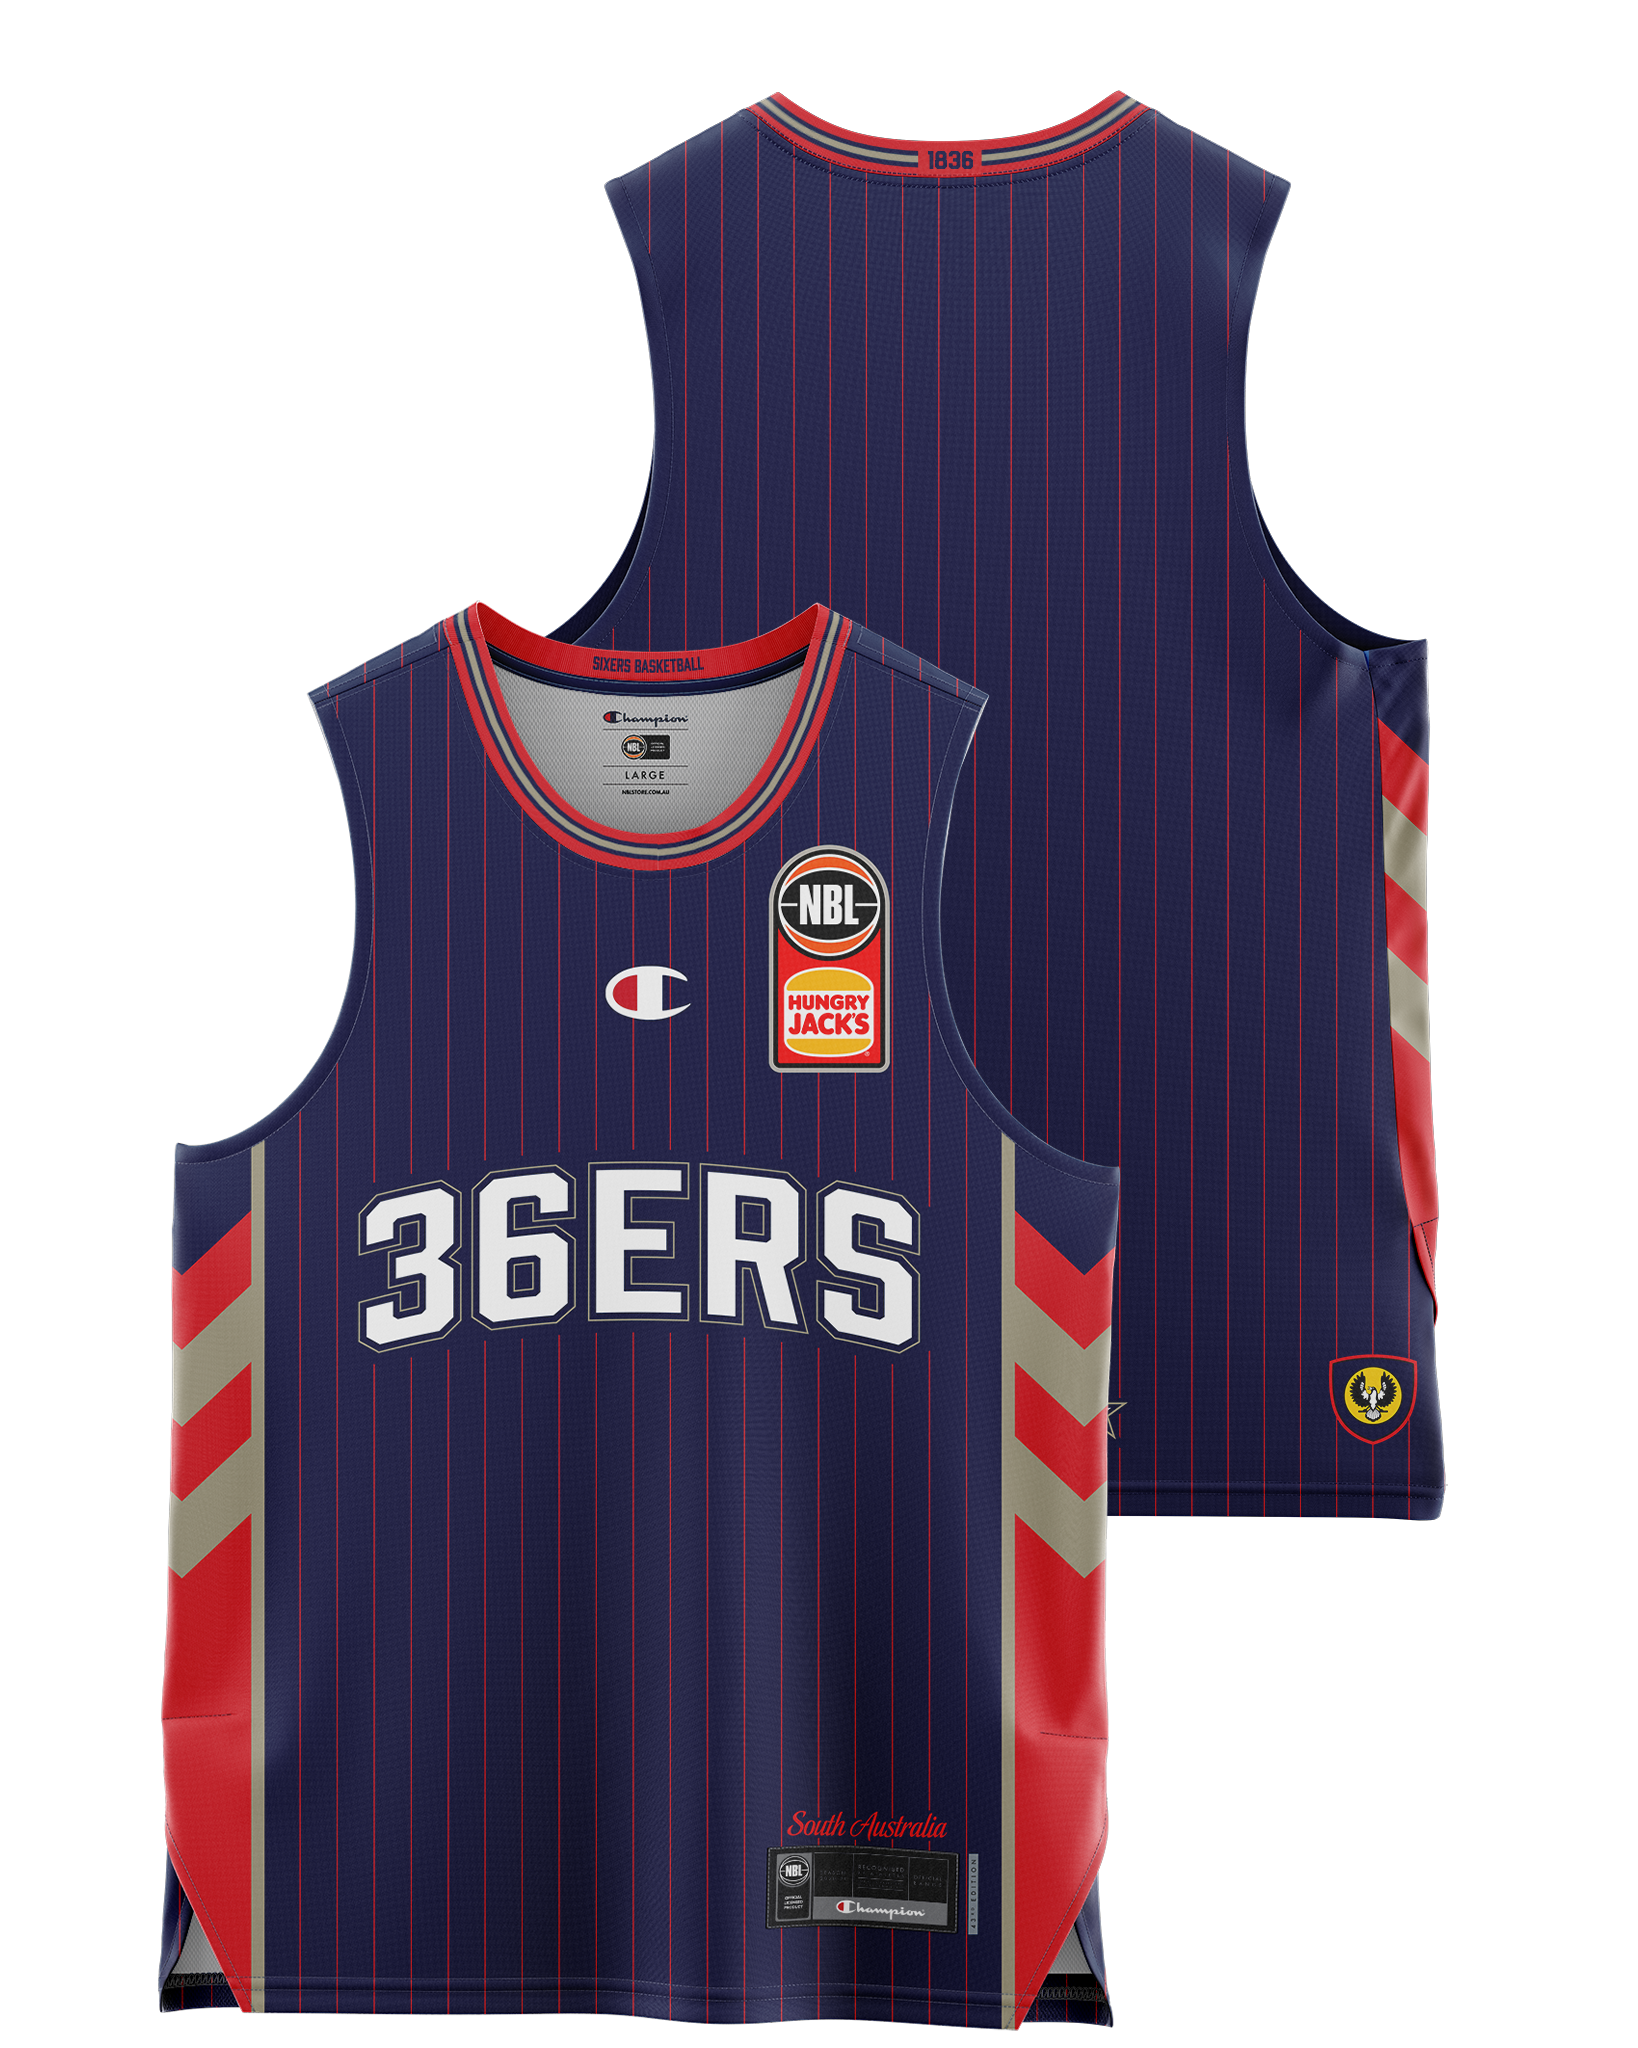 Adelaide 36ers 2021 Authentic Home Infant Jersey - Adelaide 36ers